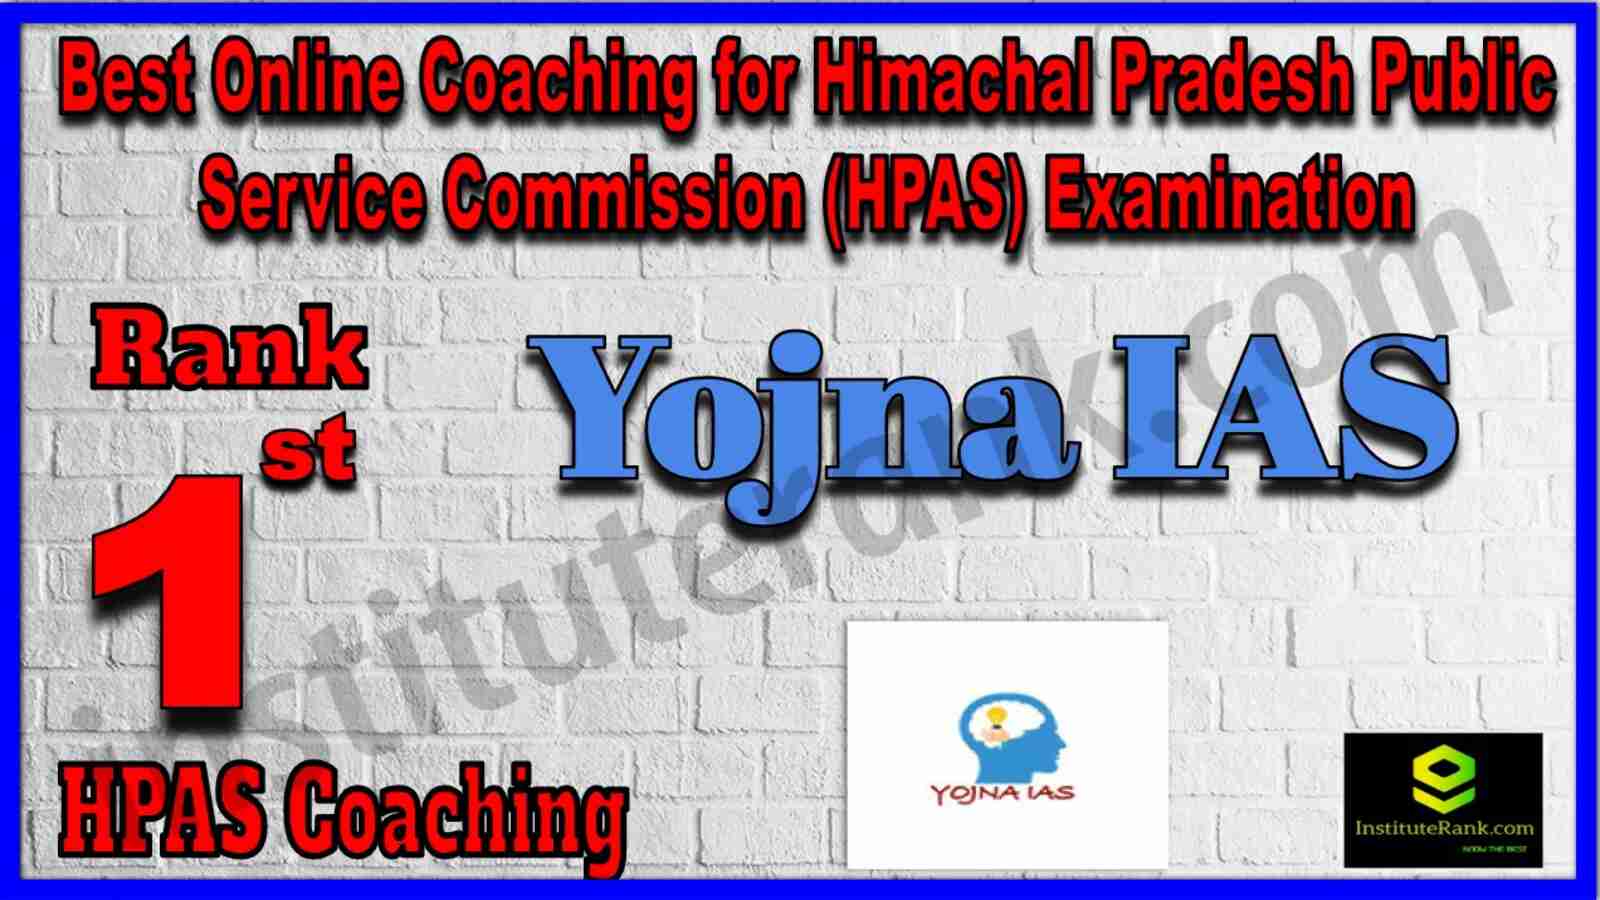 Rank 1 Best Online Coaching for Himachal Pradesh Public Service Commision(HPAS) Examination 2022